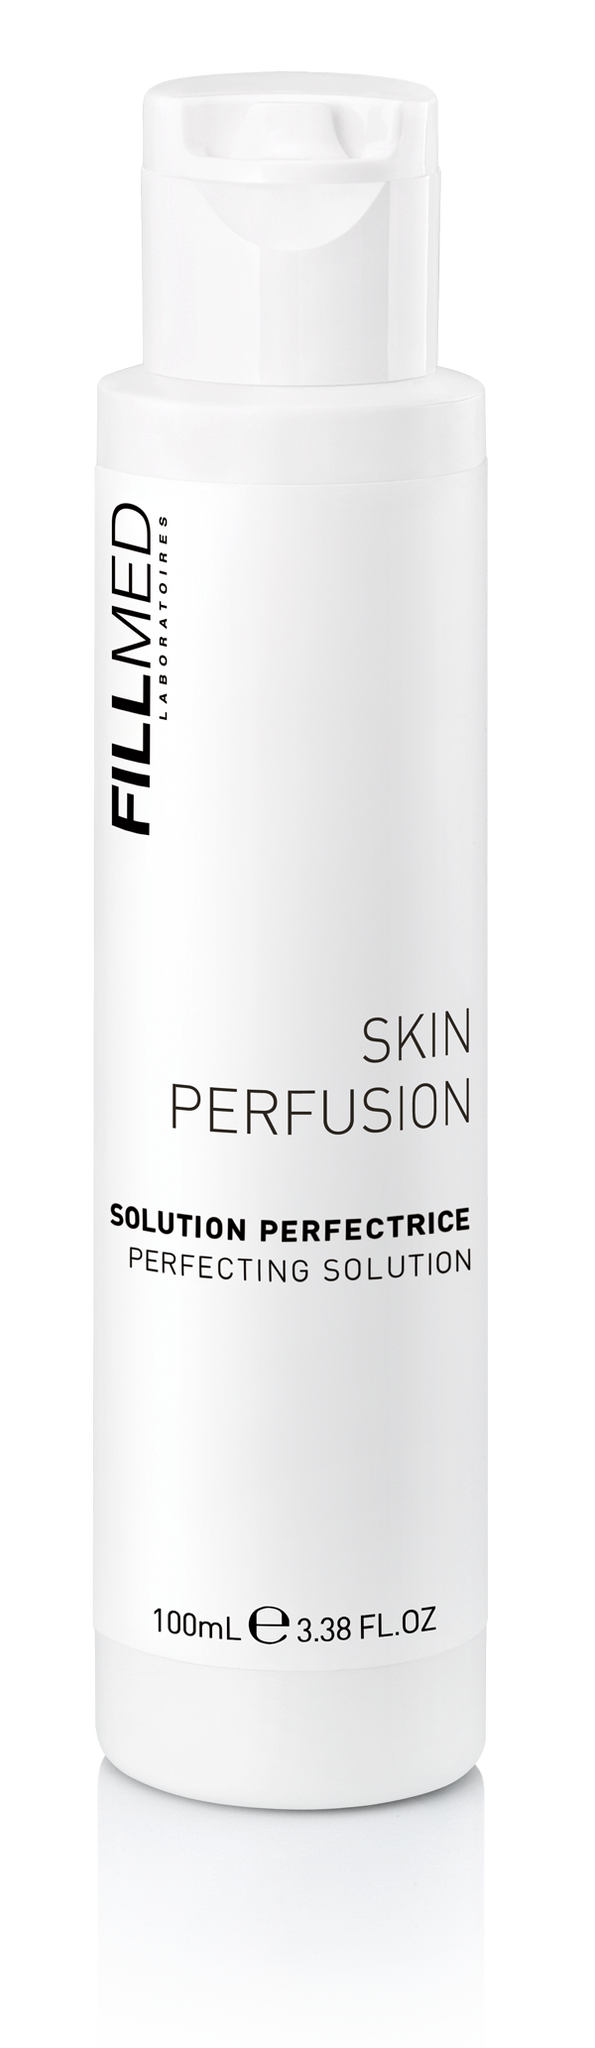 SKIN PERFUSION SOLUTION PERFECTRICE 100ml